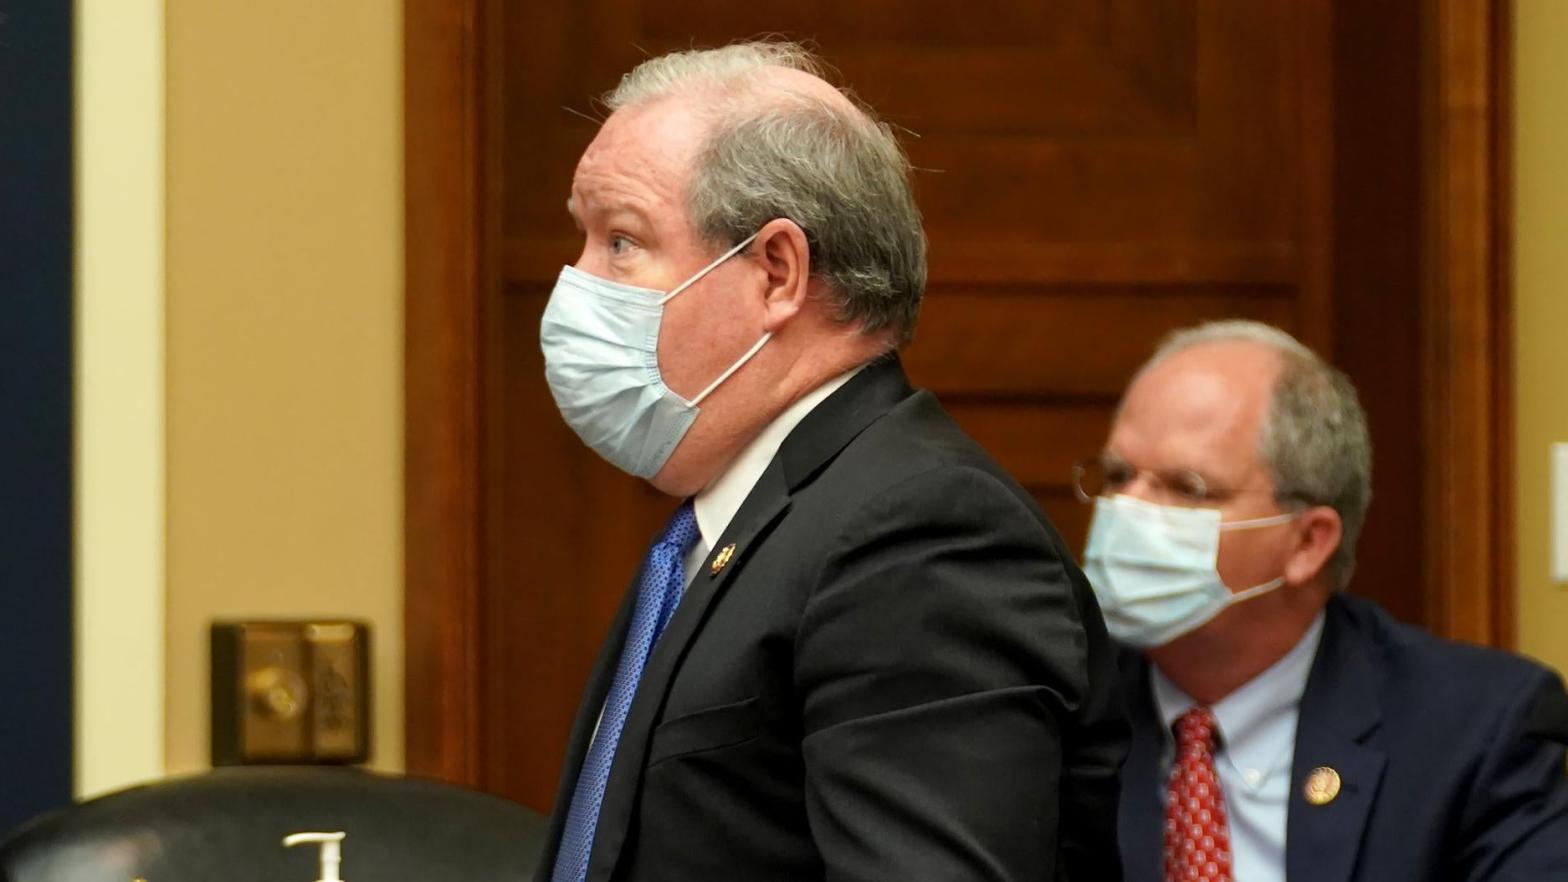 Rep. Larry Bucshon (R-IN) wearing a big mask, the biggest mask anyone has ever seen, during a meeting of the House Energy and Commerce Subcommittee on Health on May 14, 2020. (Photo: Greg Nash / Pool, Getty Images)